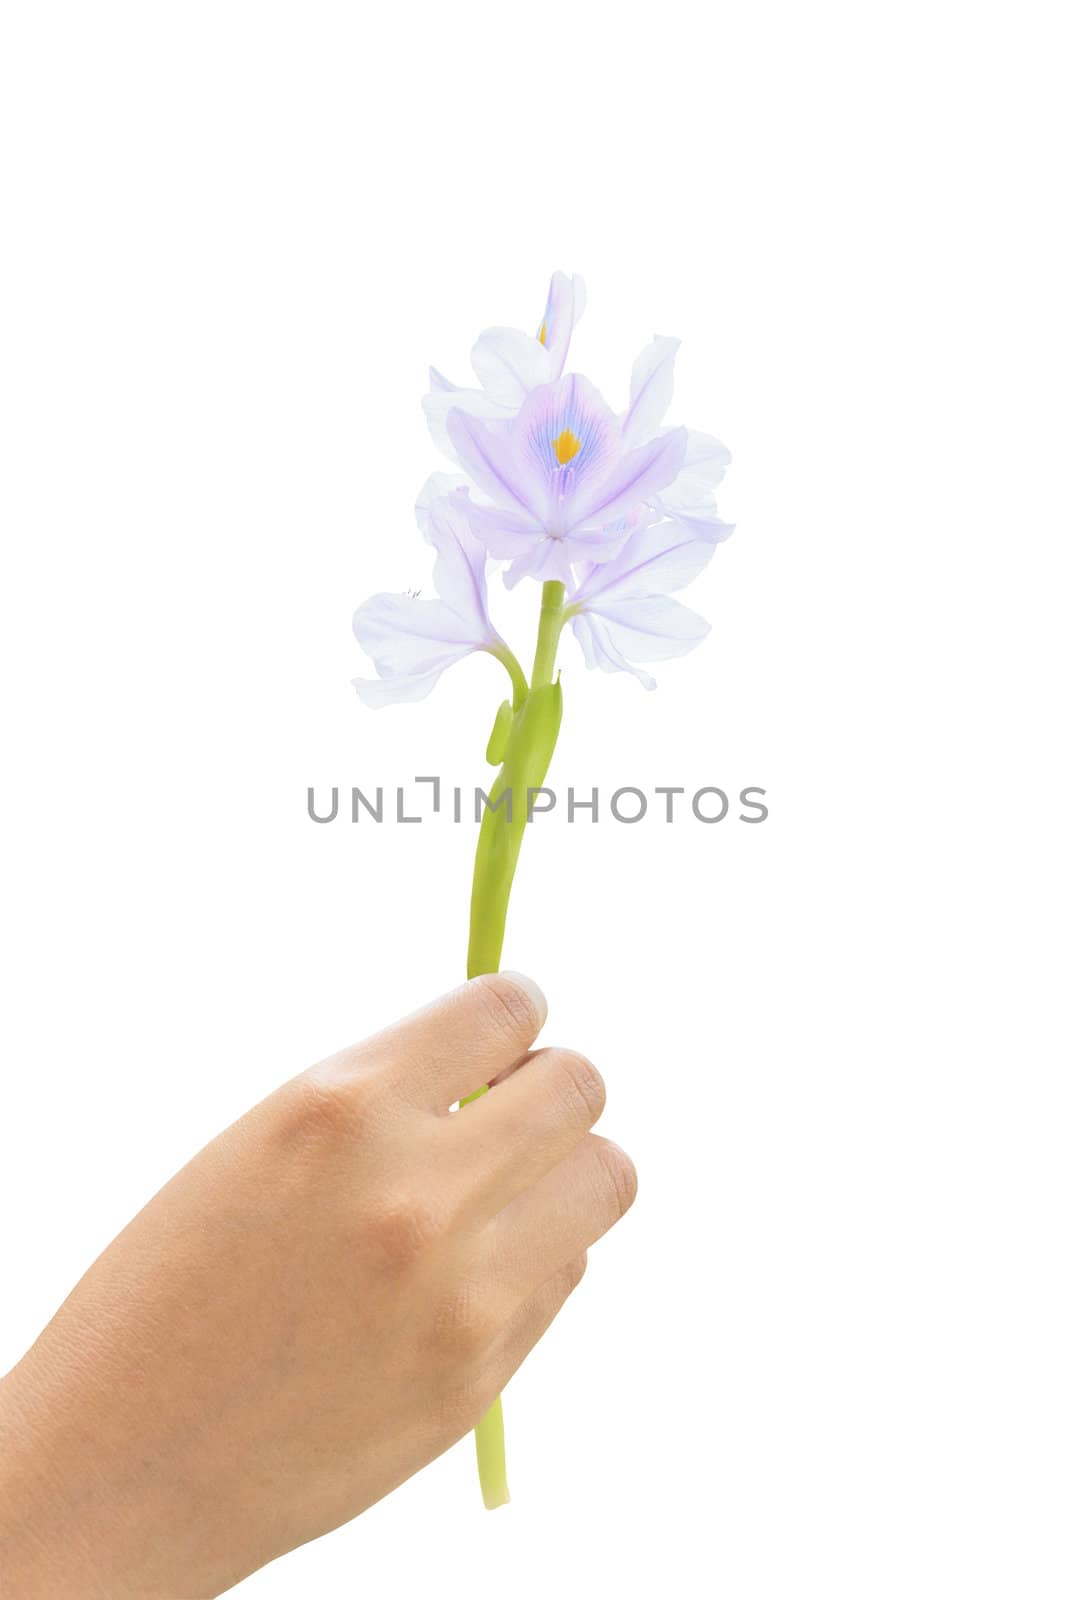 Thai woman hand holding a Water Hyacinth (Eichhornia crassipes) flower on the white background